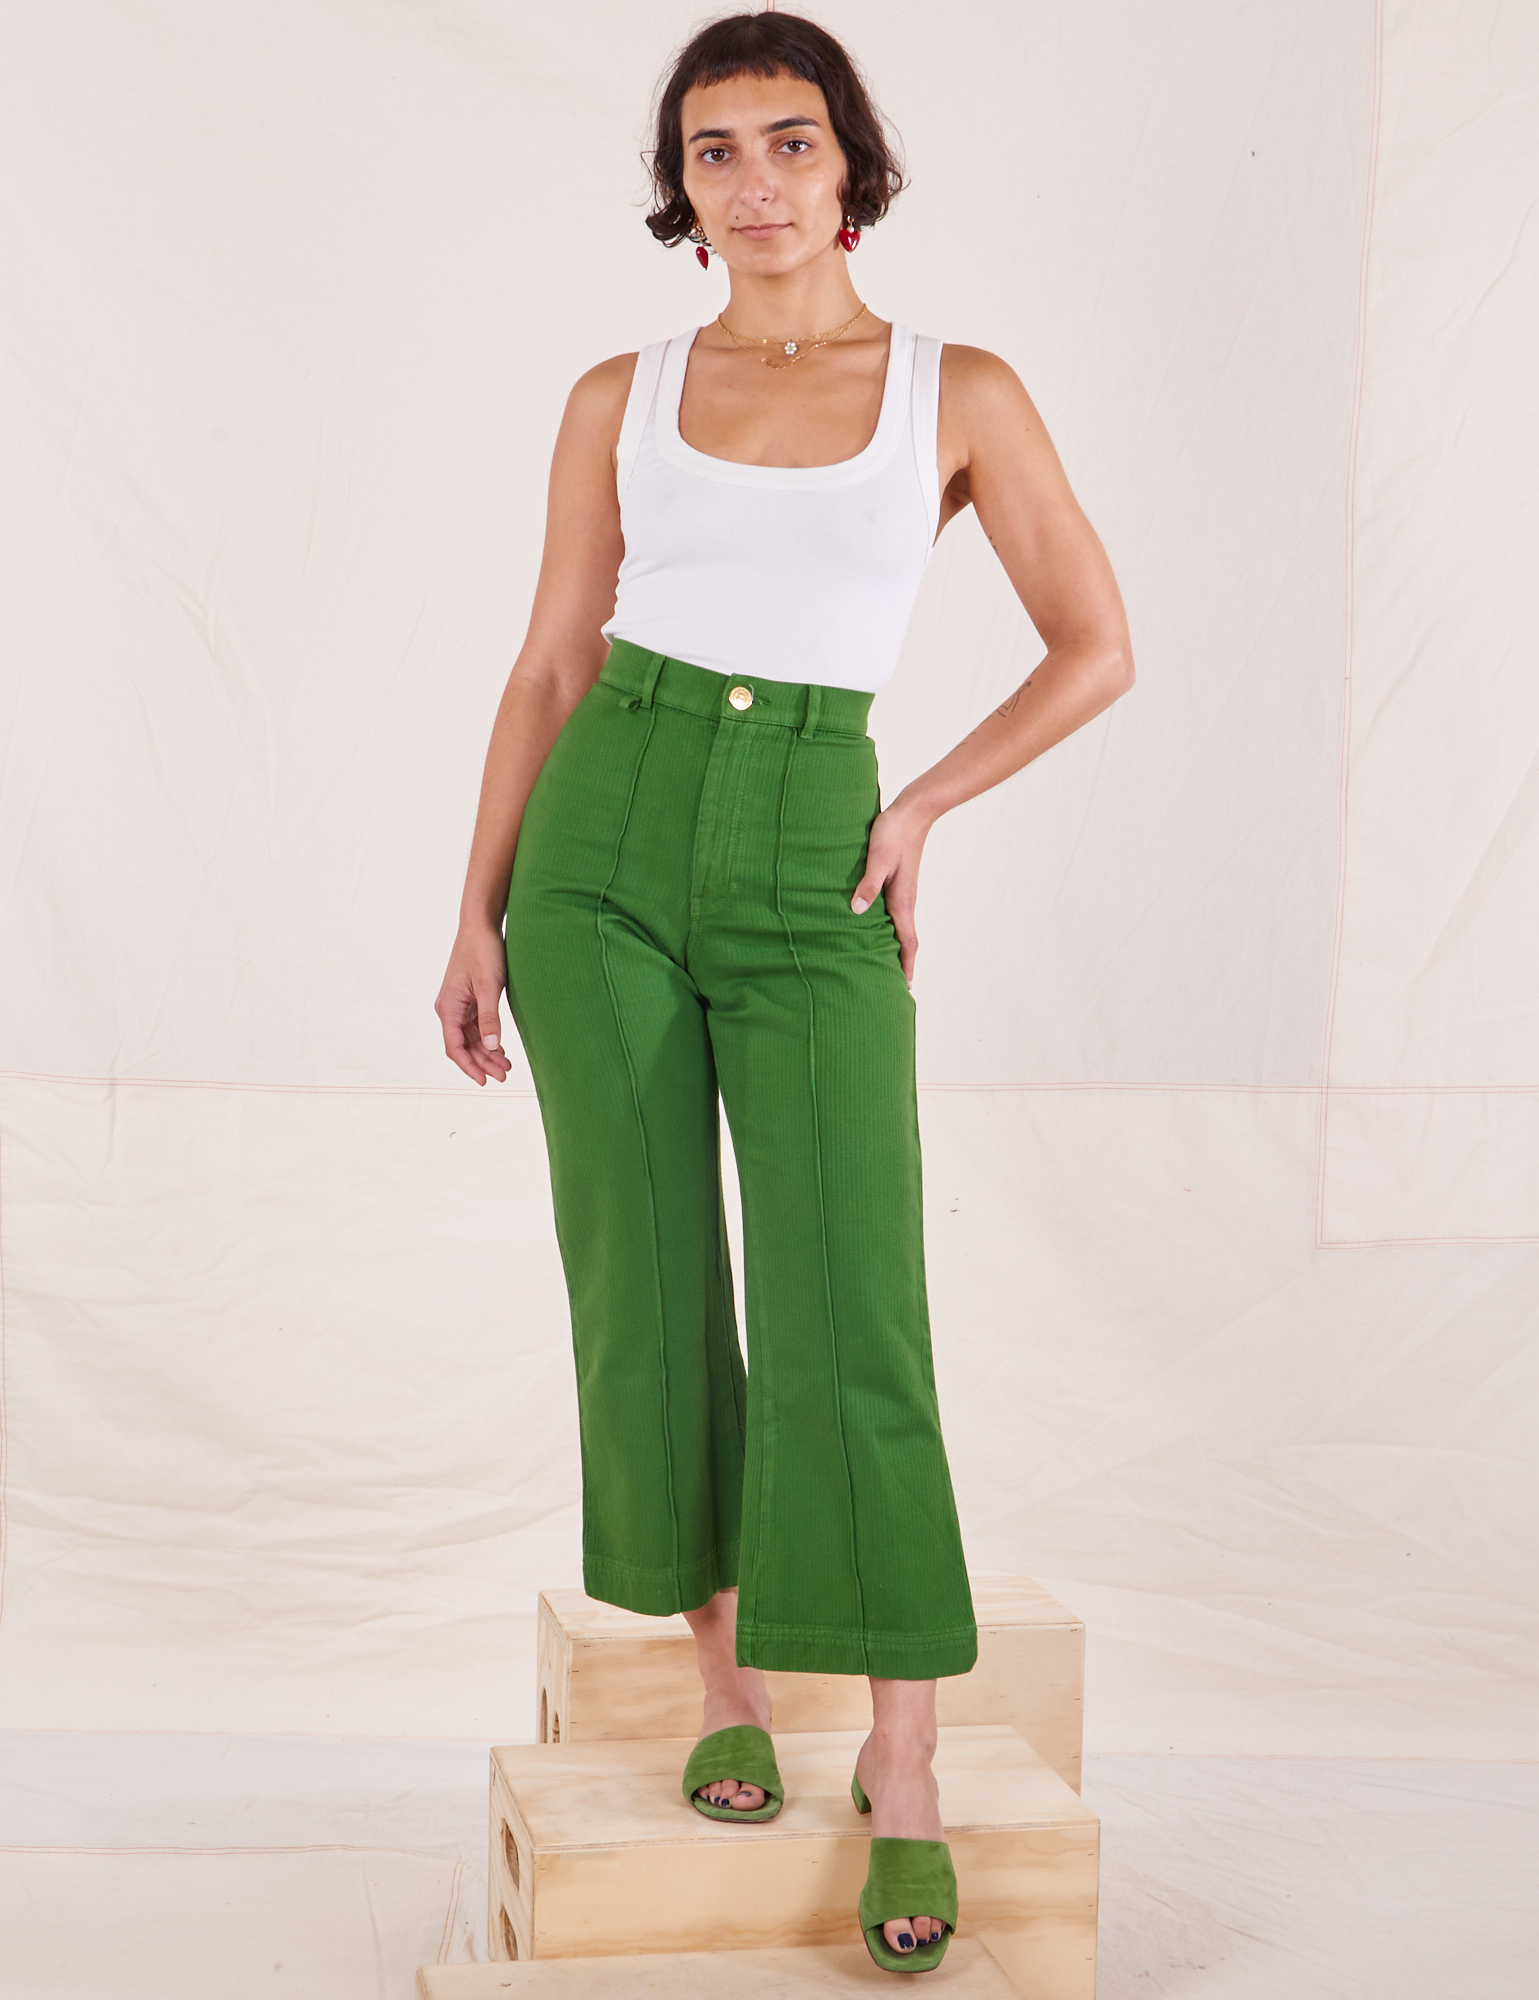 Soraya is 5'3" and wearing XXS Petite Heritage Westerns in Lawn Green paired with Cropped Tank Top in vintage tee off-white